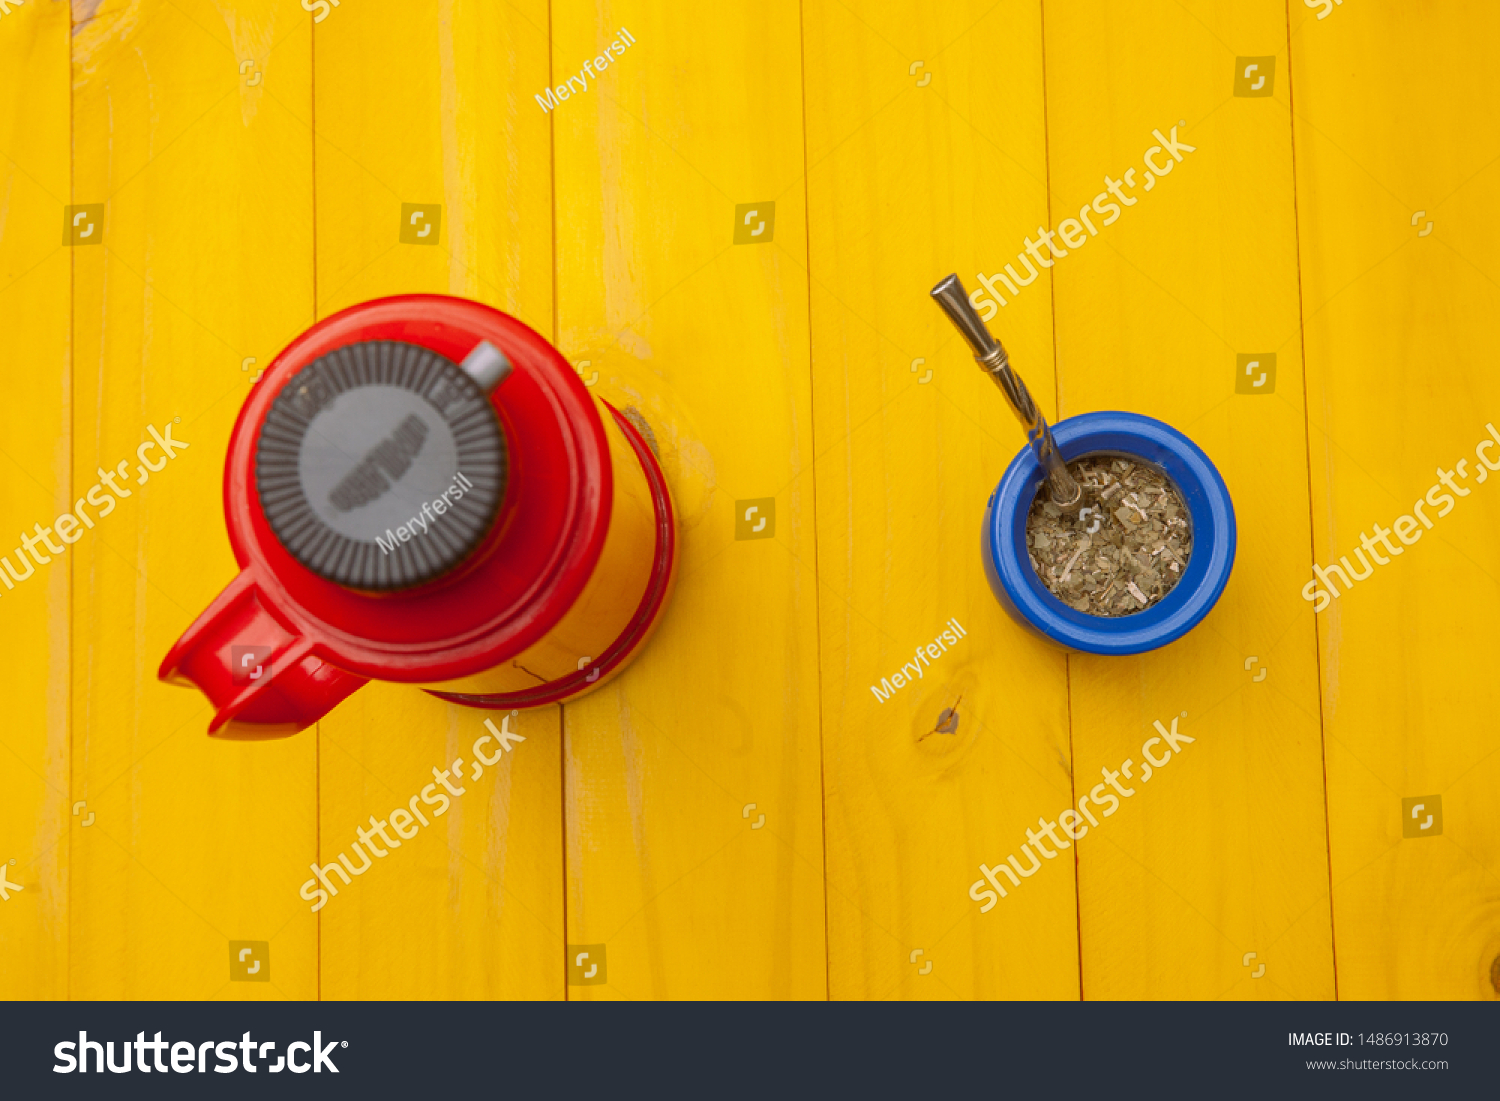 Download Blue Matte Red Thermos Yellow Wooden Stock Photo Edit Now 1486913870 Yellowimages Mockups